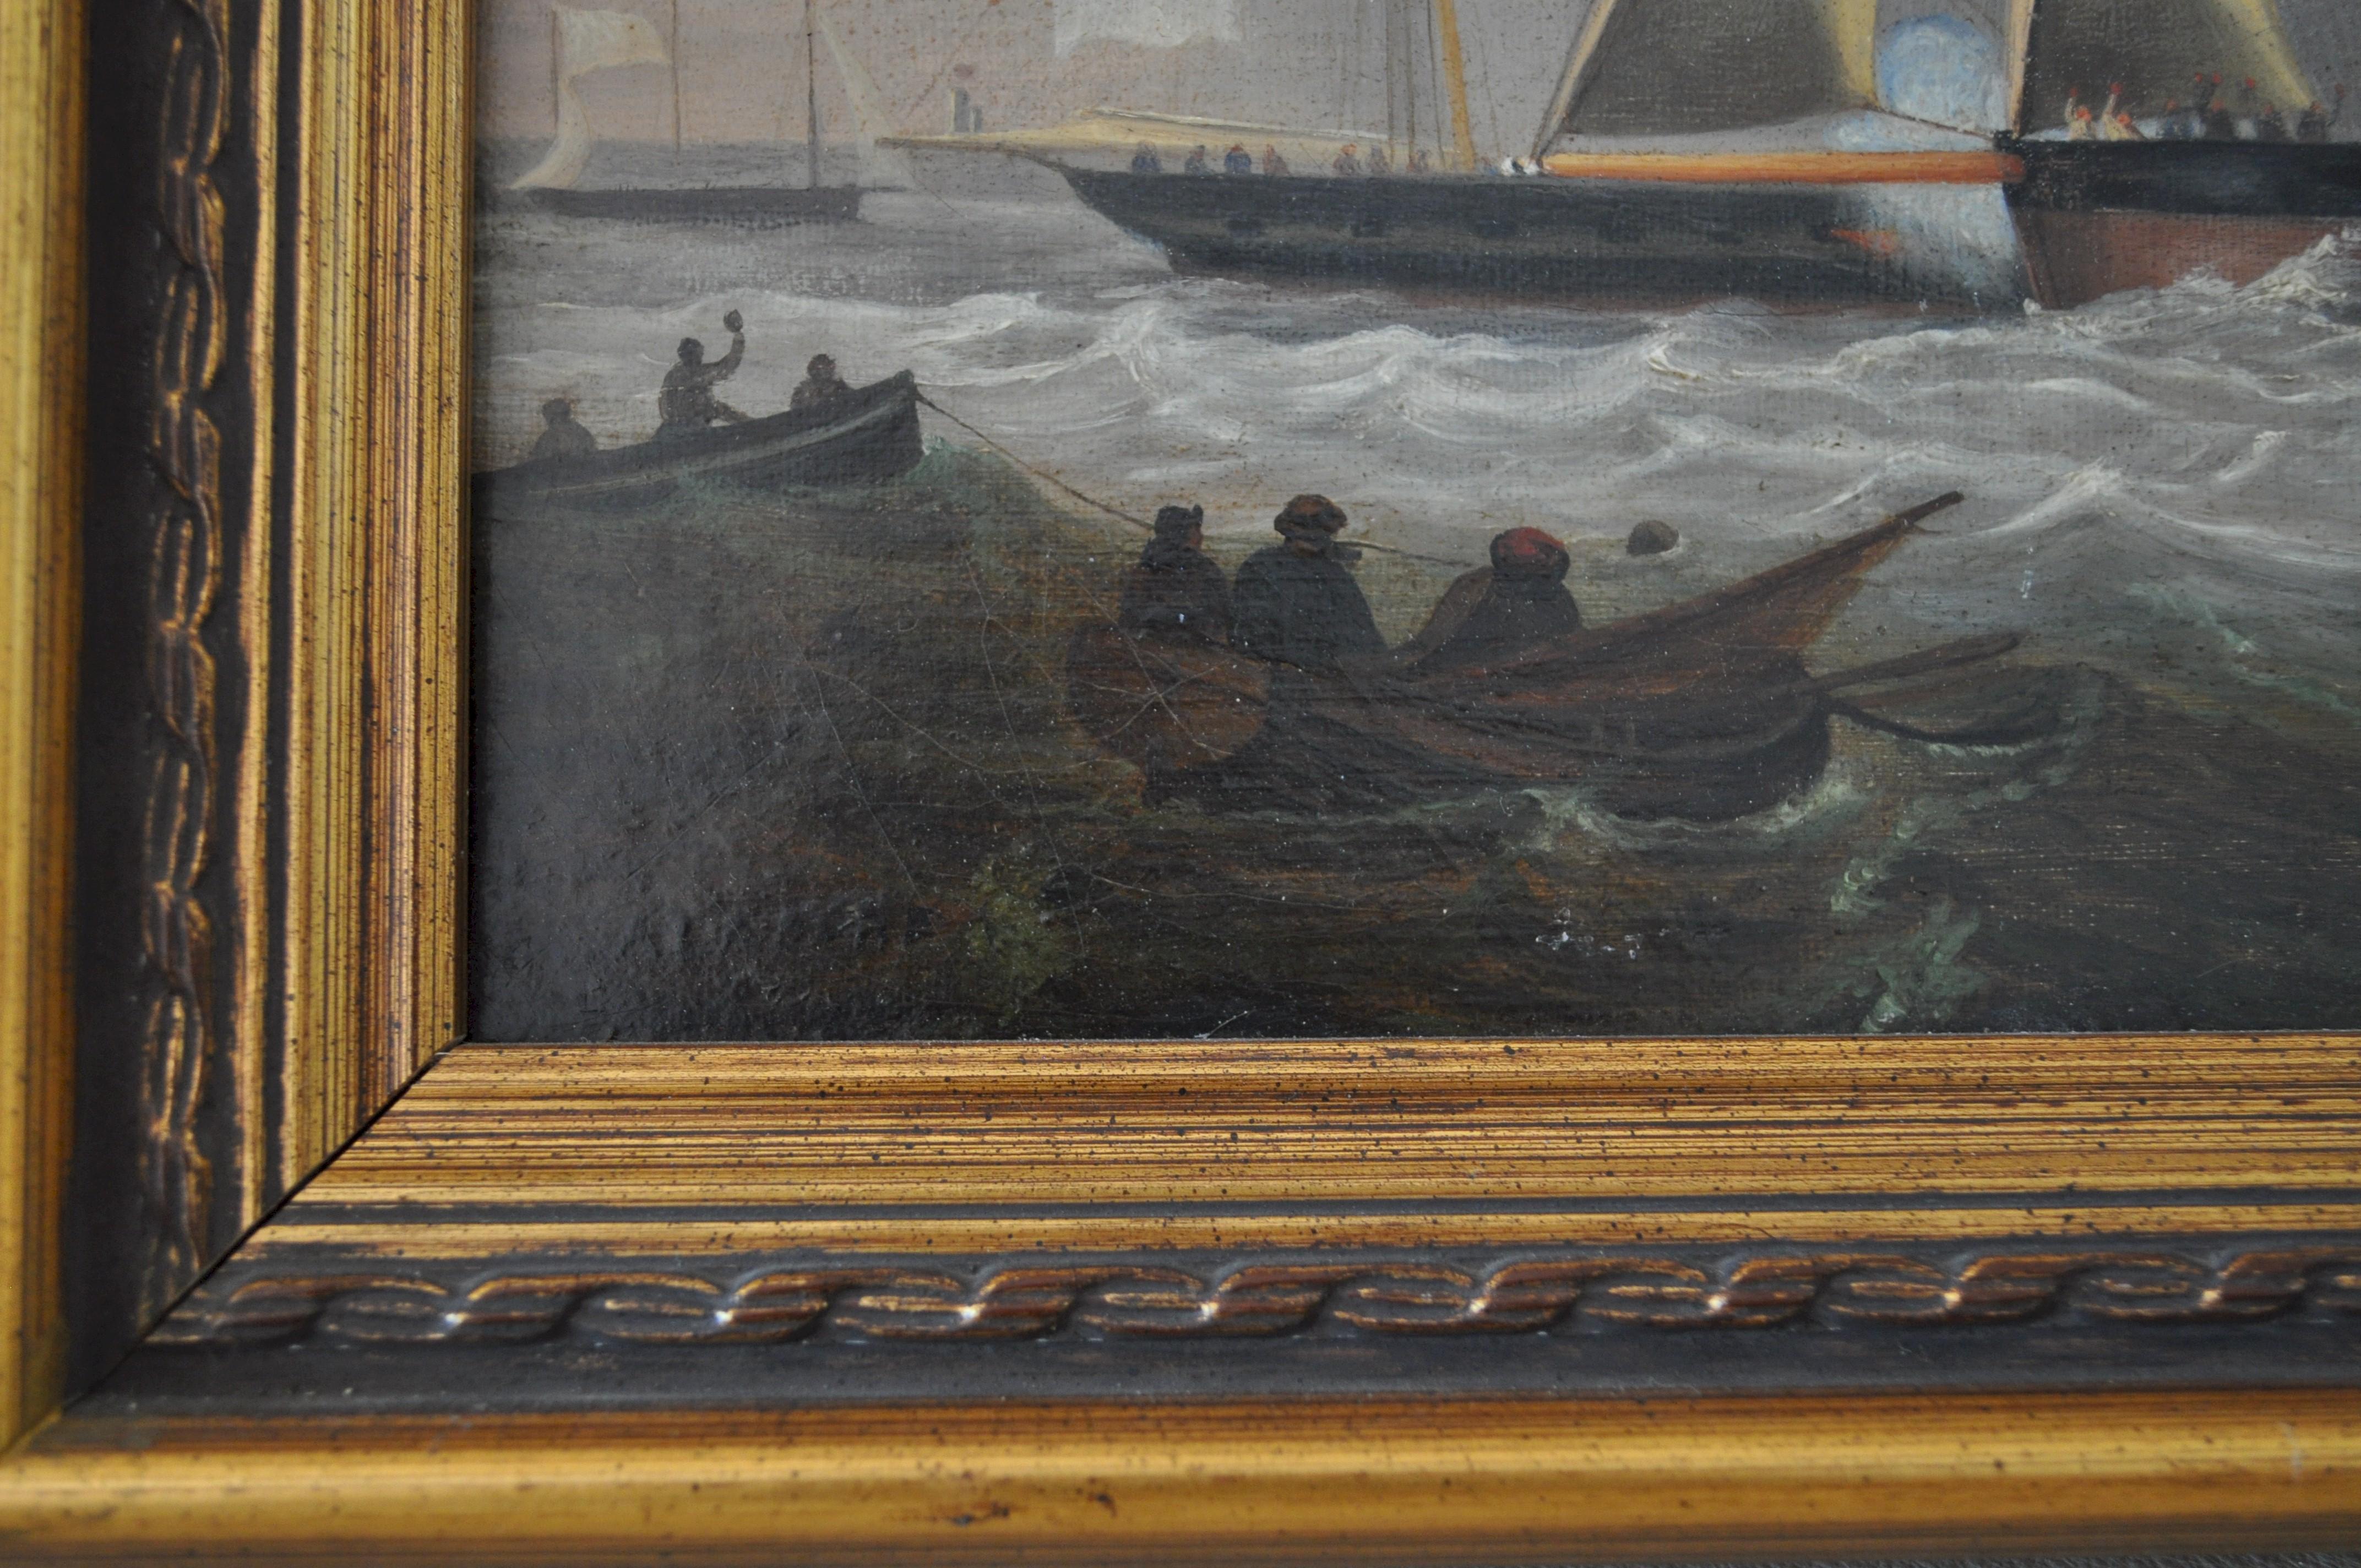 A naïve 19th century marine oil painting on canvas. This charming little picture is full of action, choppy seas under a stormy sky. A good entry level painting with which to start your maritime collection; a genuine 19th century painting for less